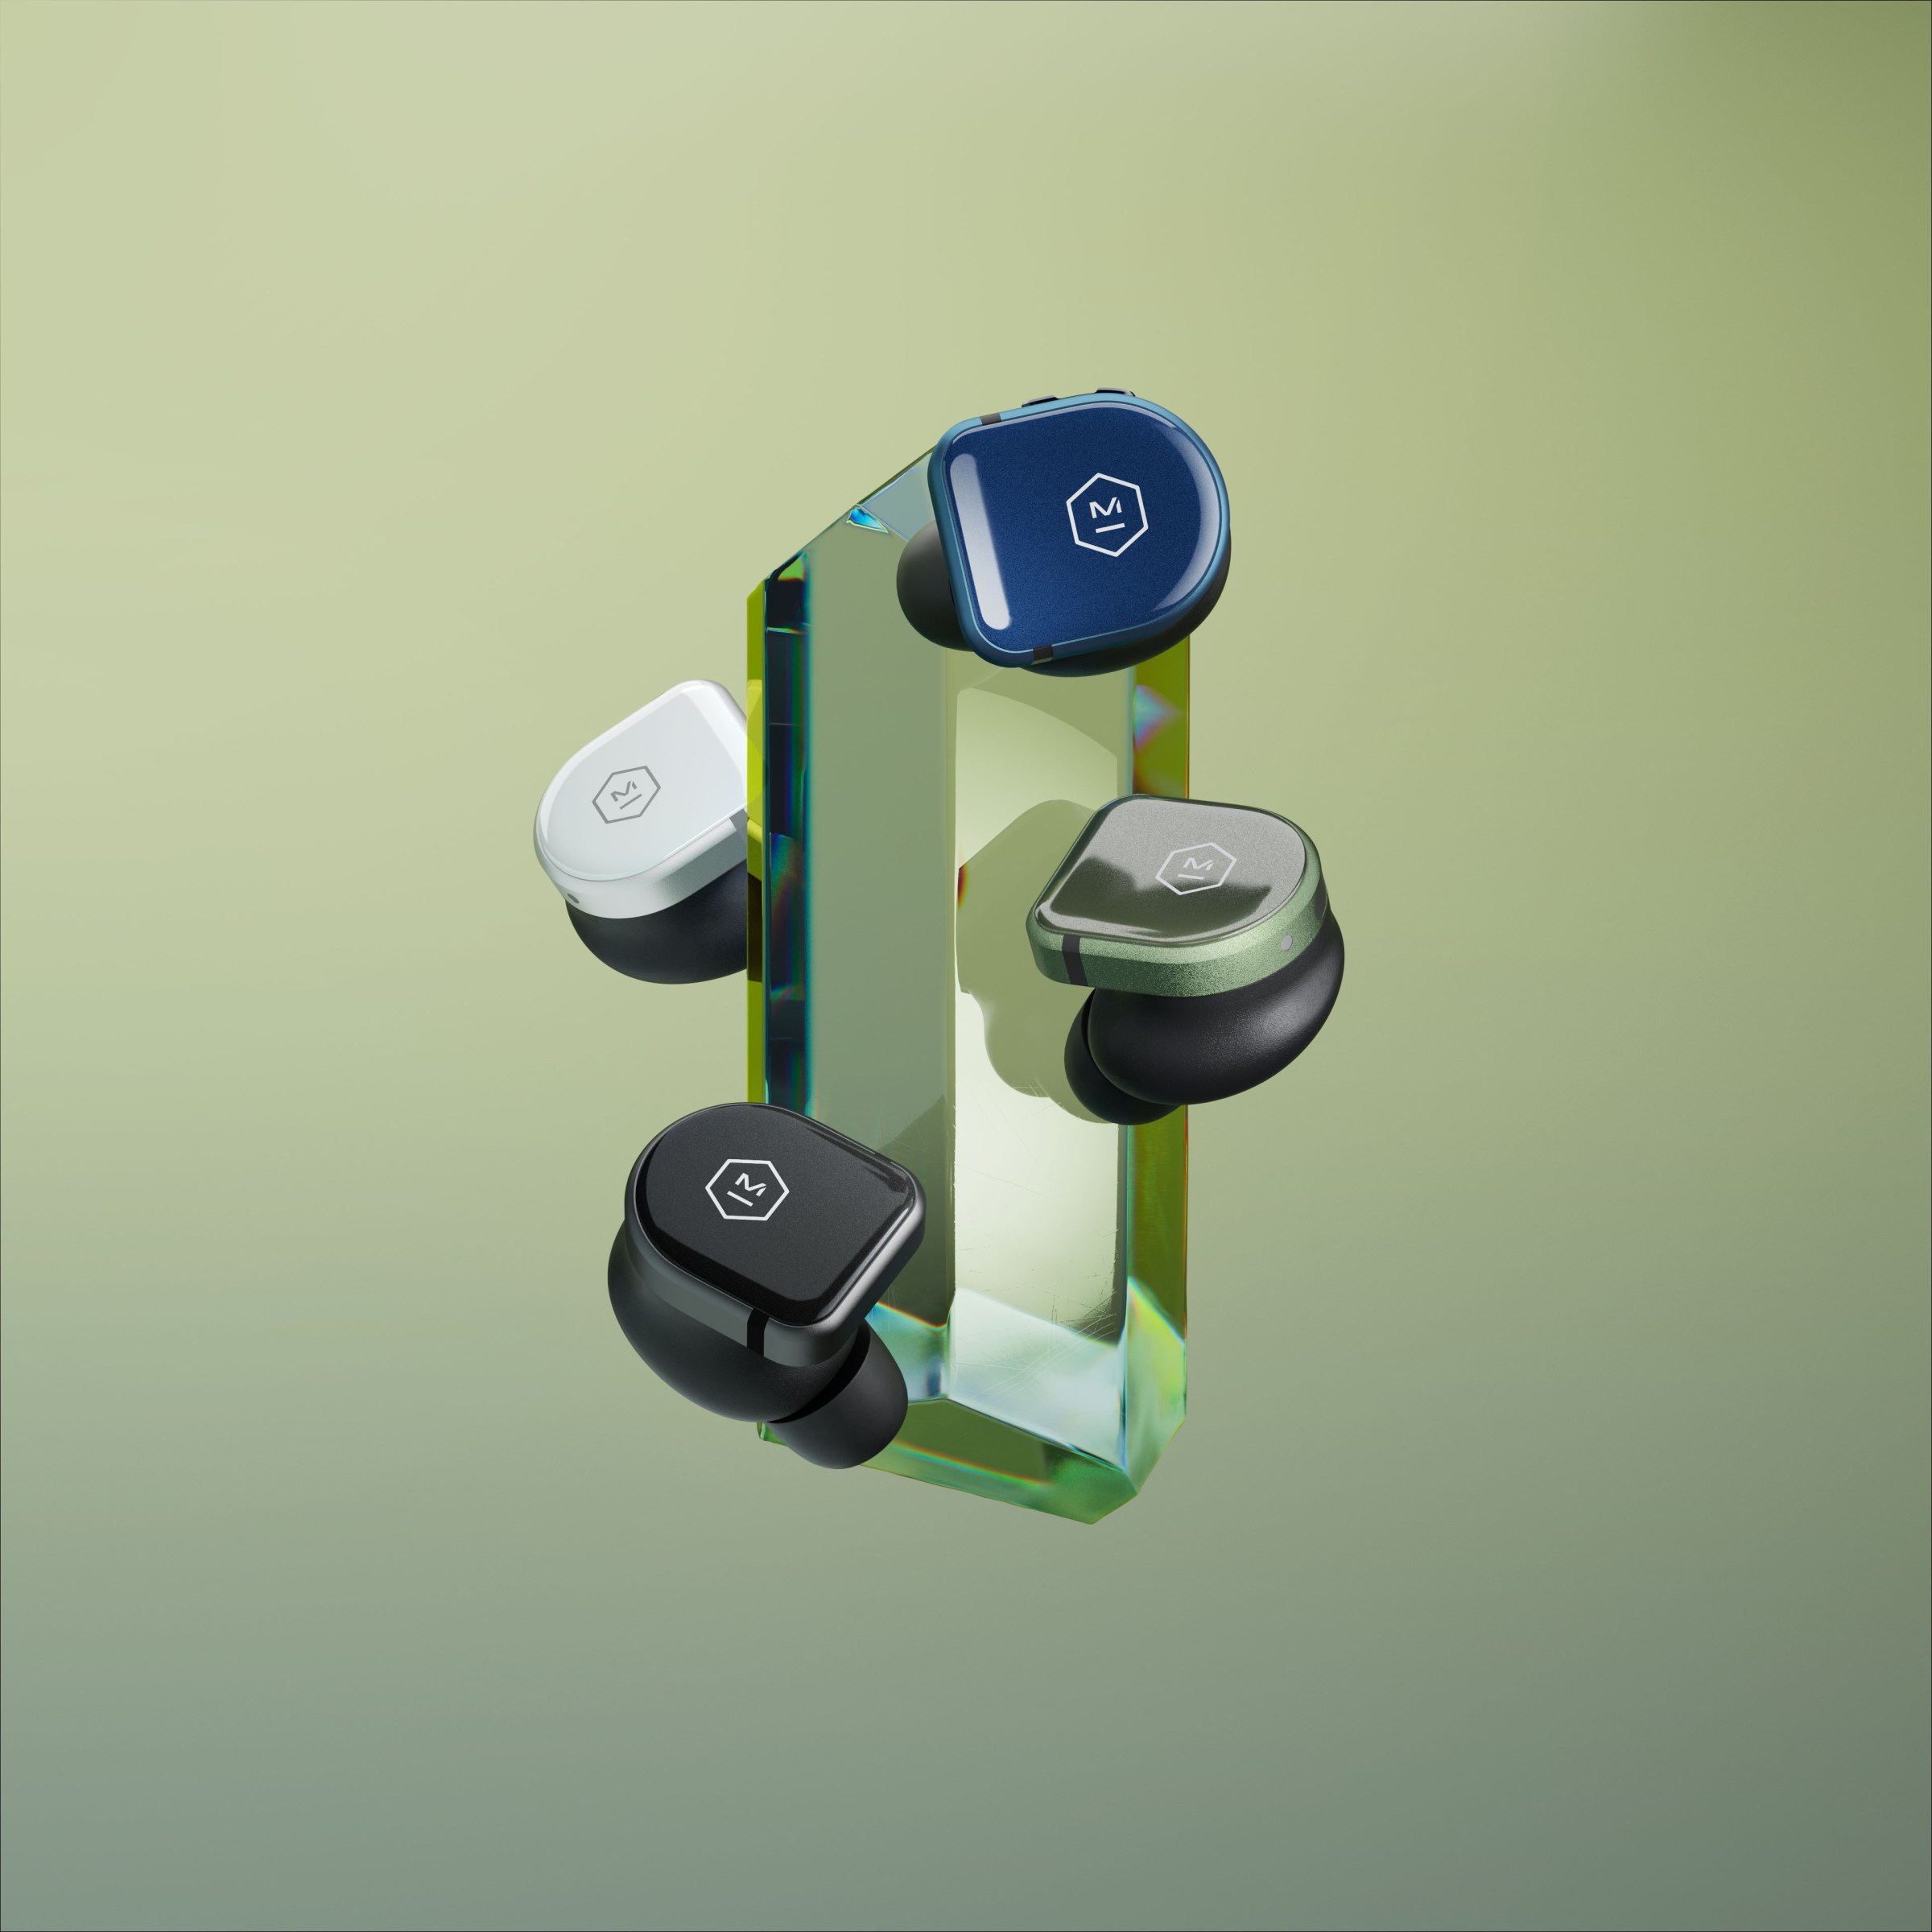 The MW08 Sport True Wireless Earphones feature luxe and durable materials, and an enhanced fit for workouts.